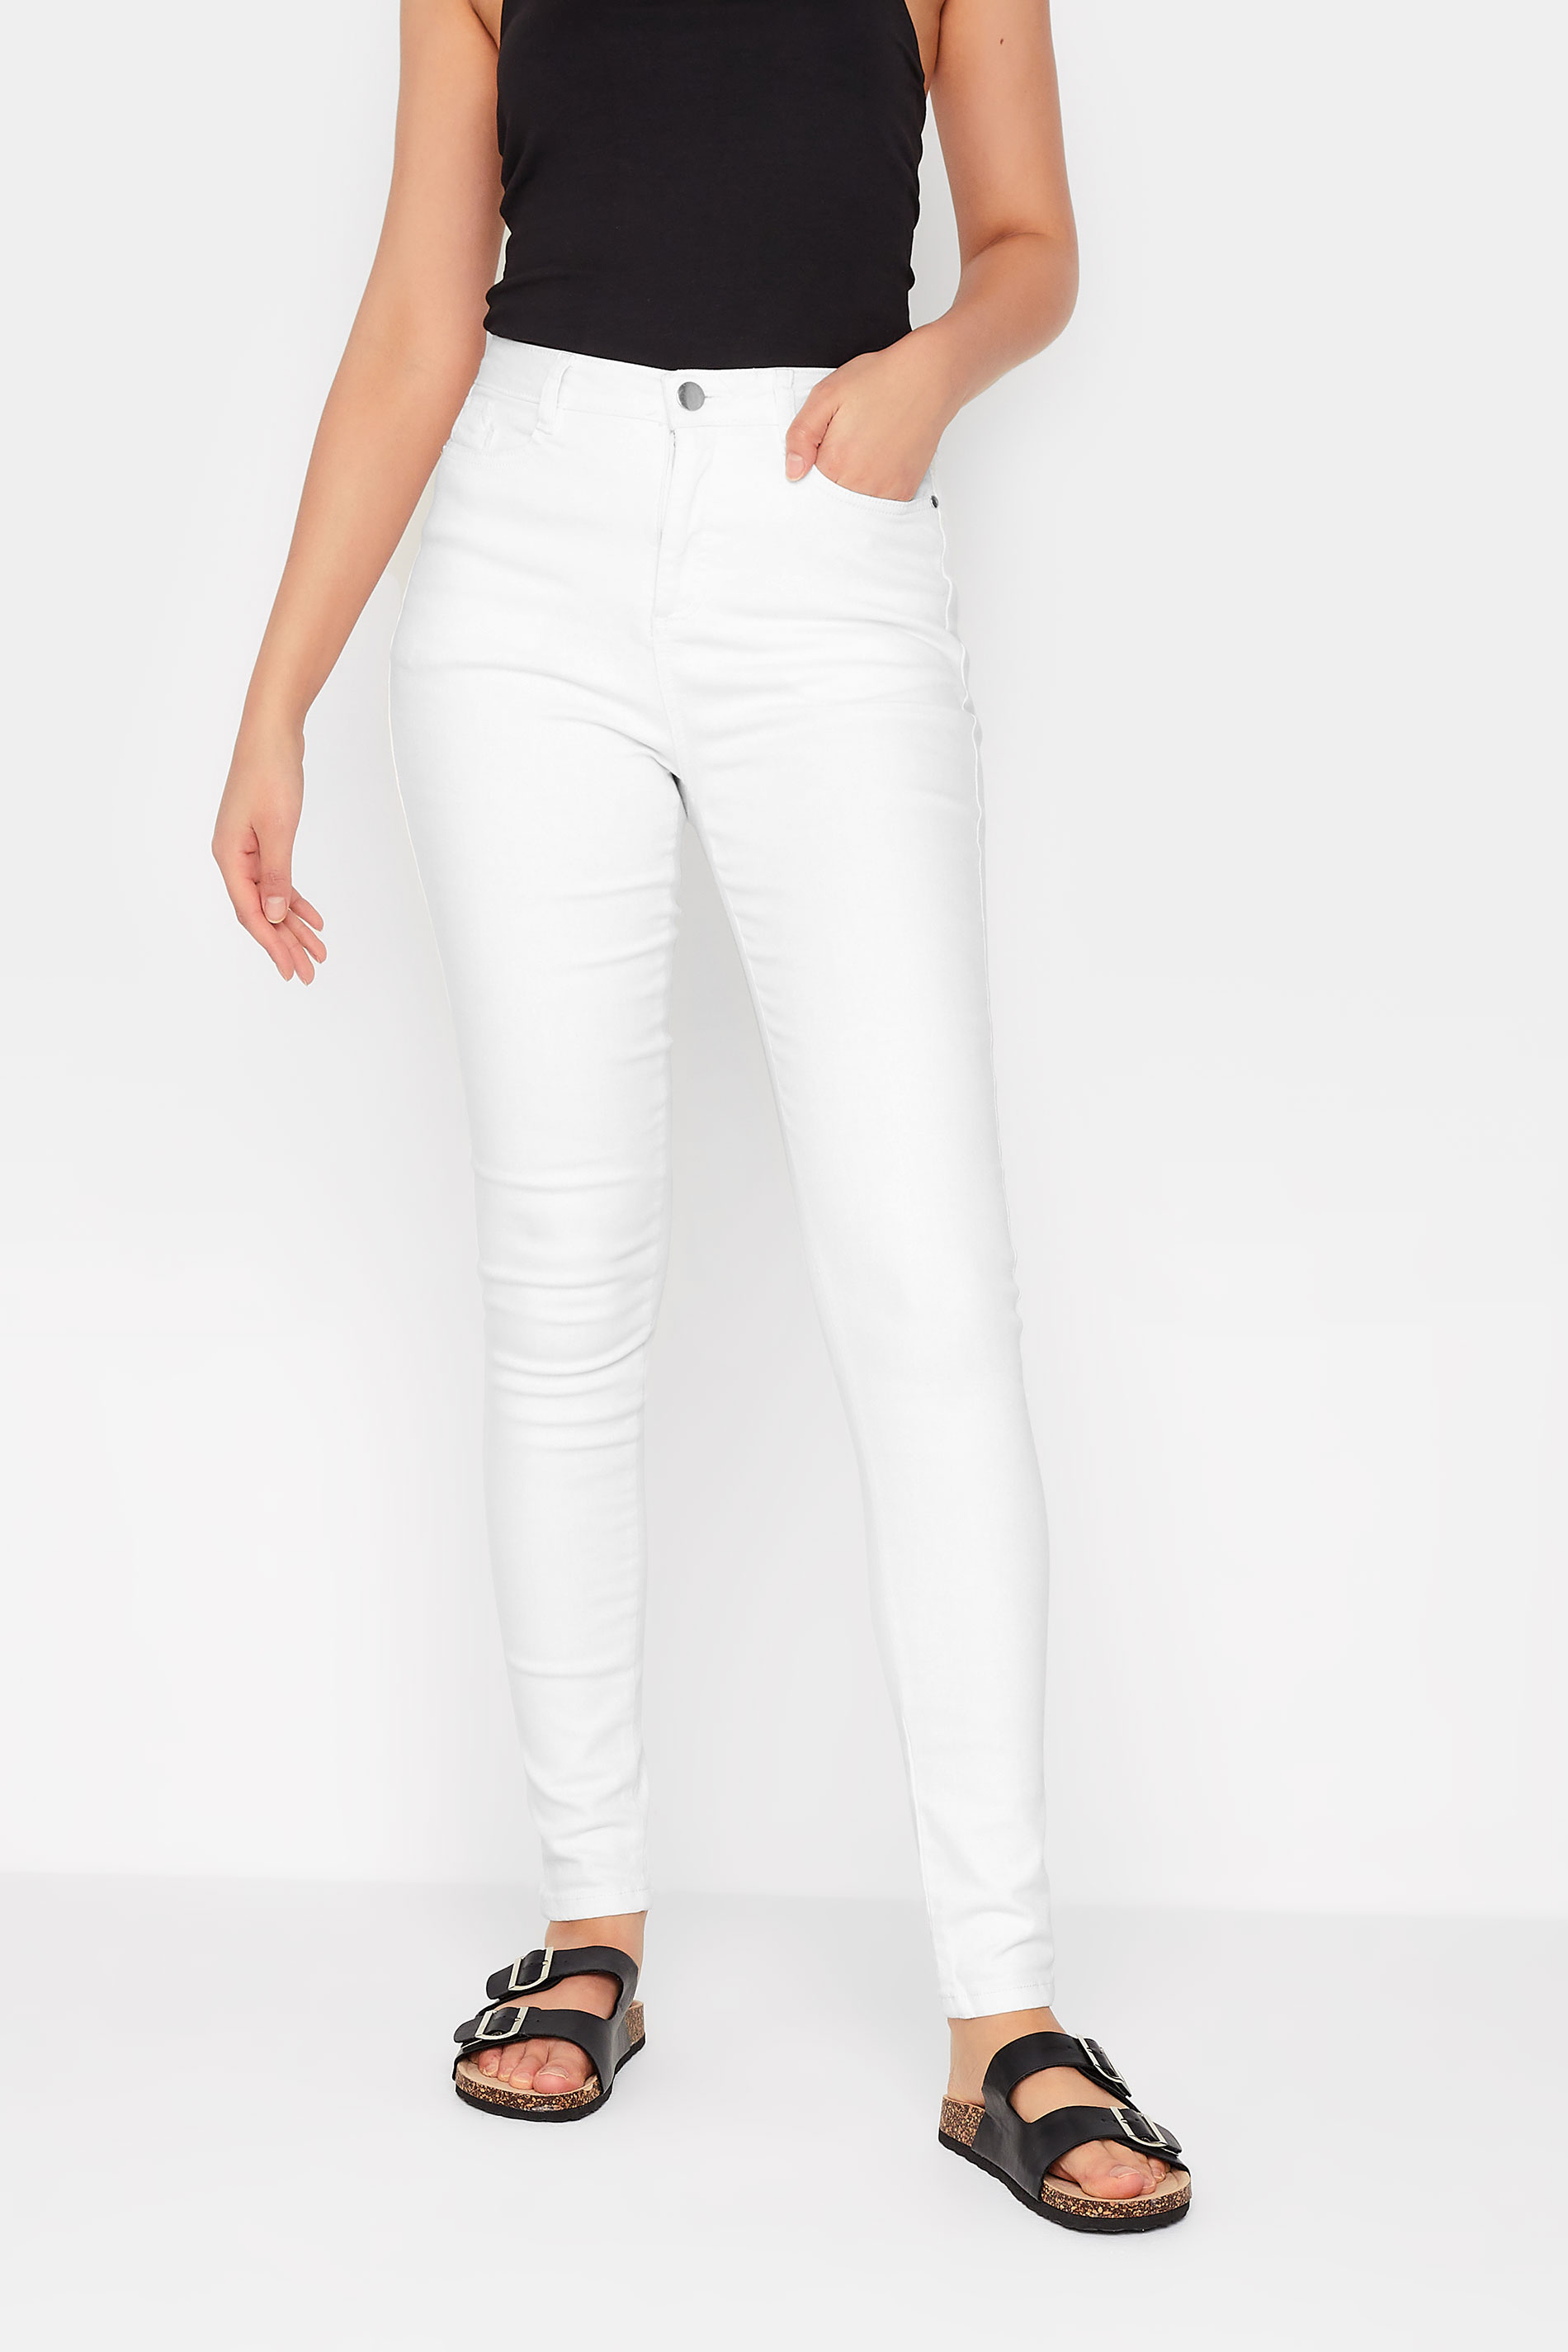 LTS White AVA Stretch Skinny Jeans | Long Tall Sally 1